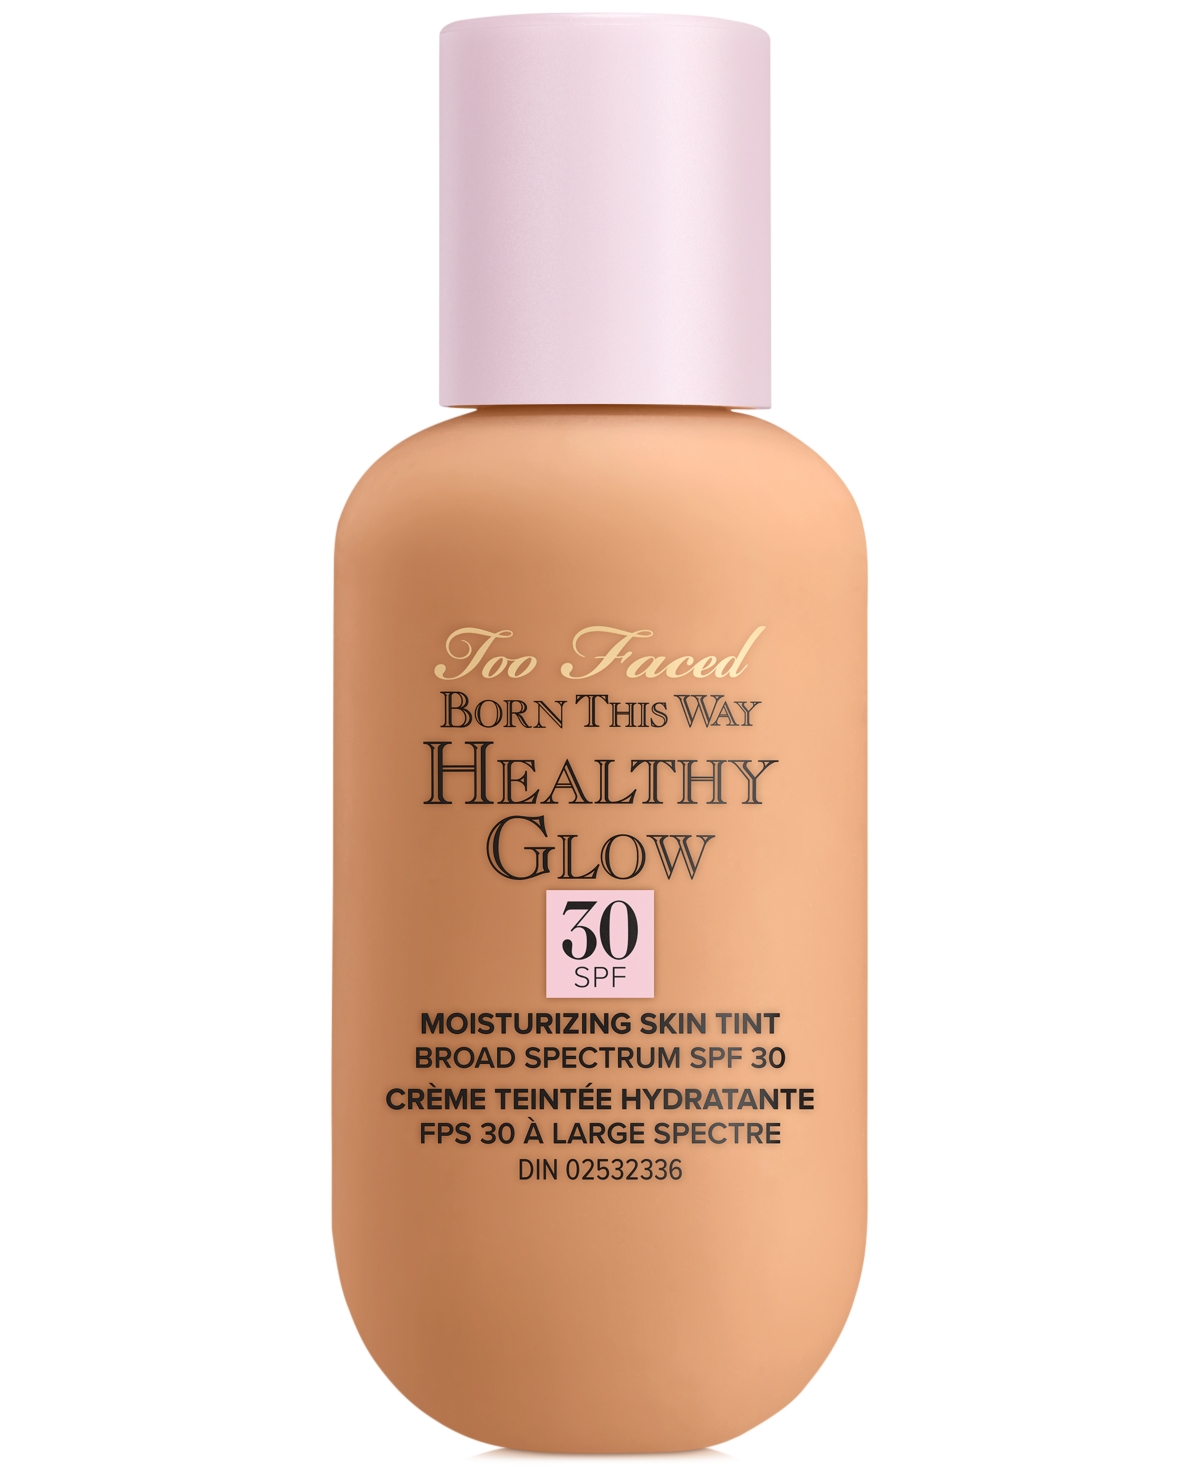 Too Faced Born This Way Healthy Glow Moisturizing Skin Tint Spf 30 In Warm Beige